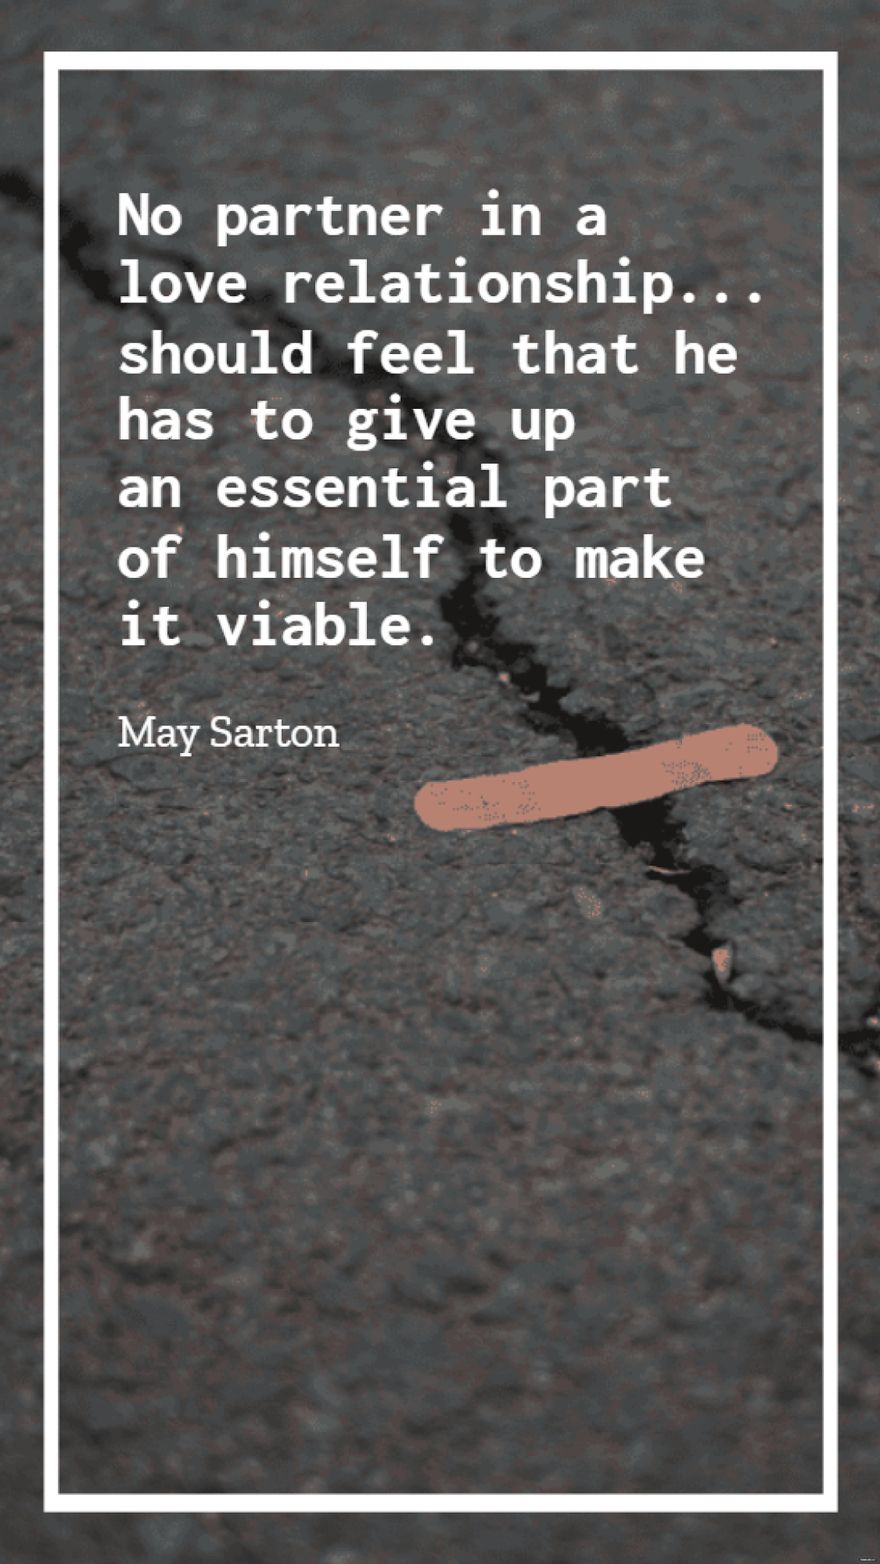 May Sarton  No partner in a love relationship should feel that he has to give up an essential part of himself to make it viable